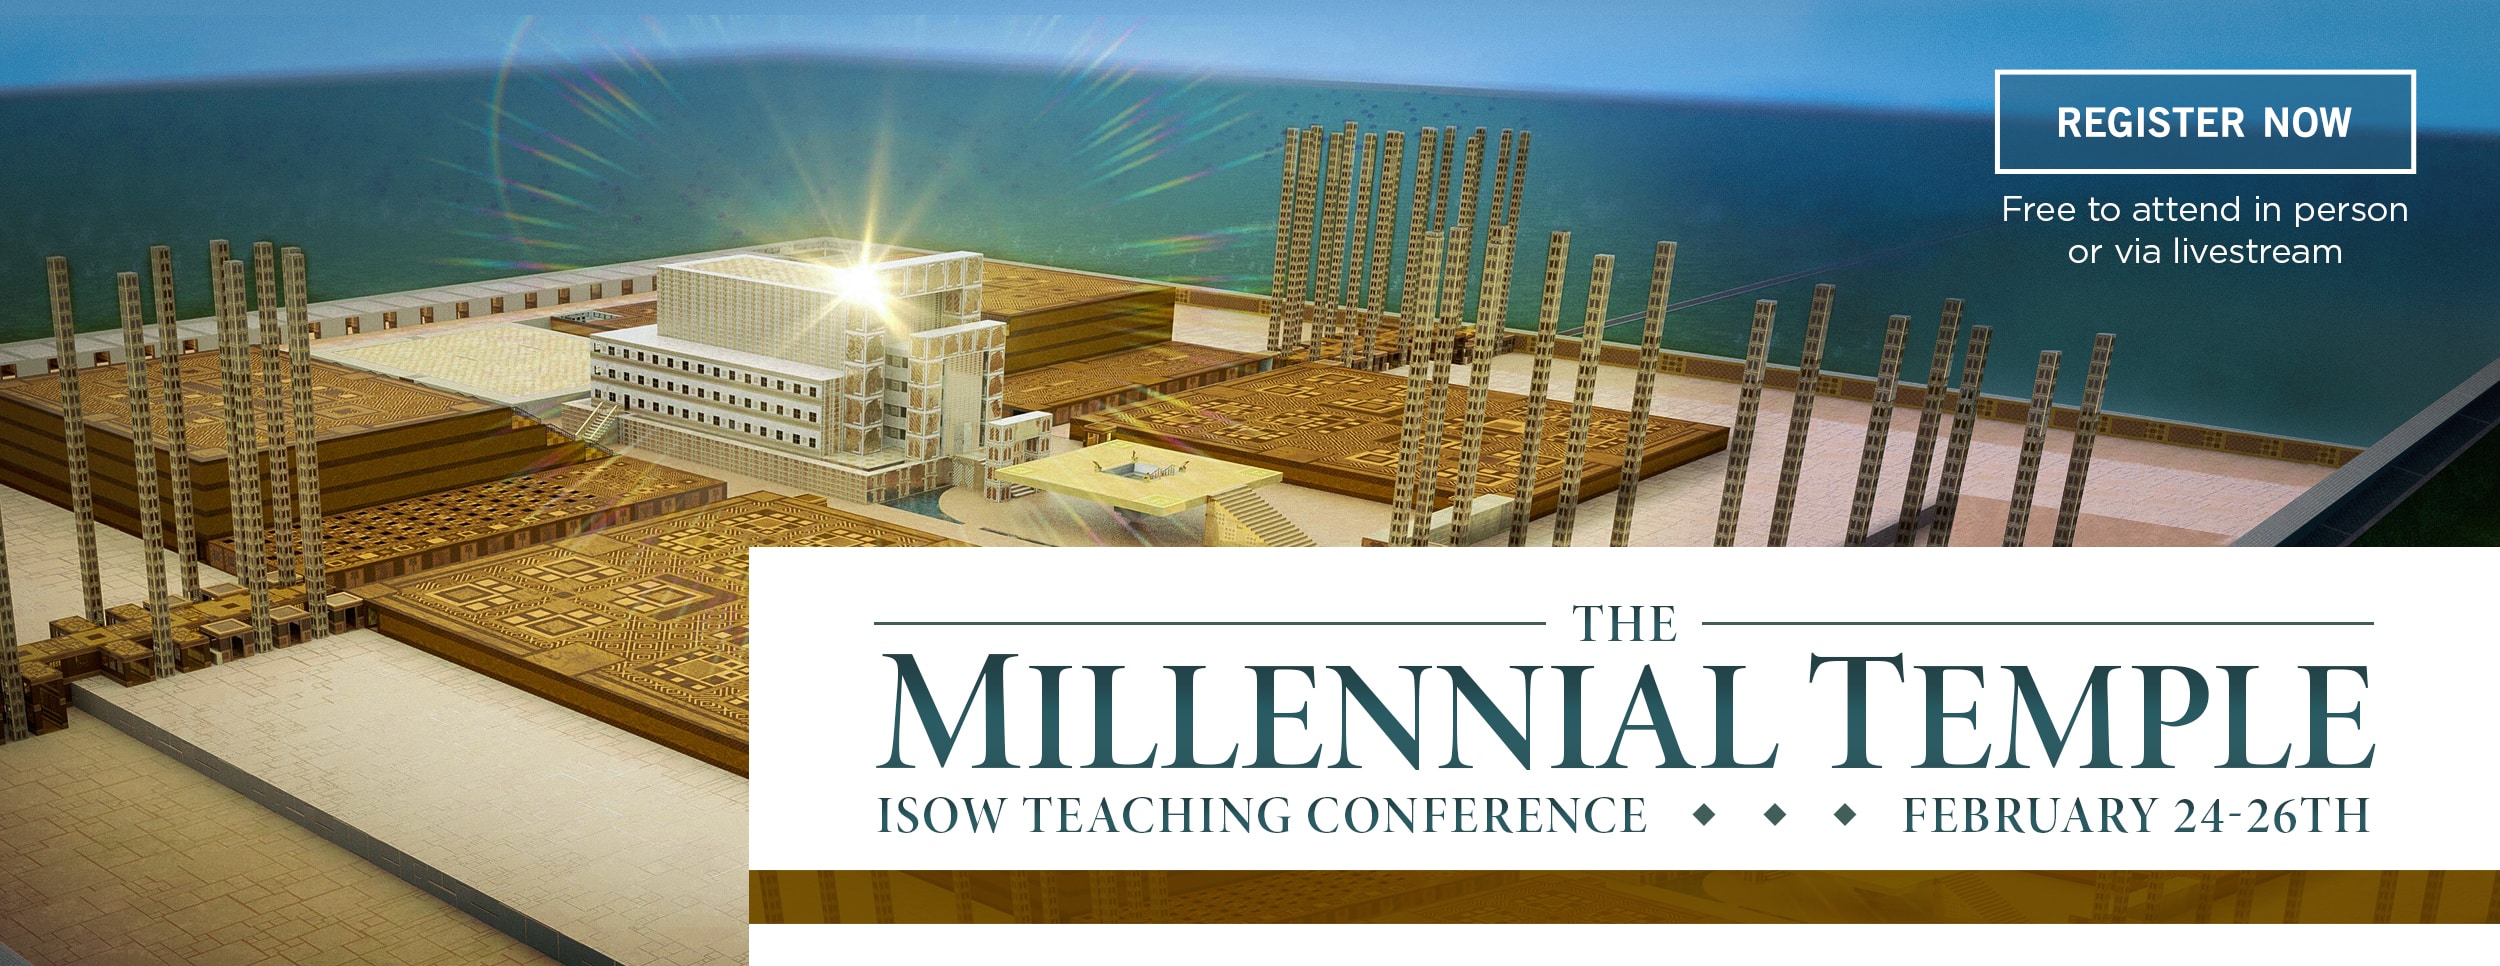 Millennial Temple Teaching Conference – Website Banner v2